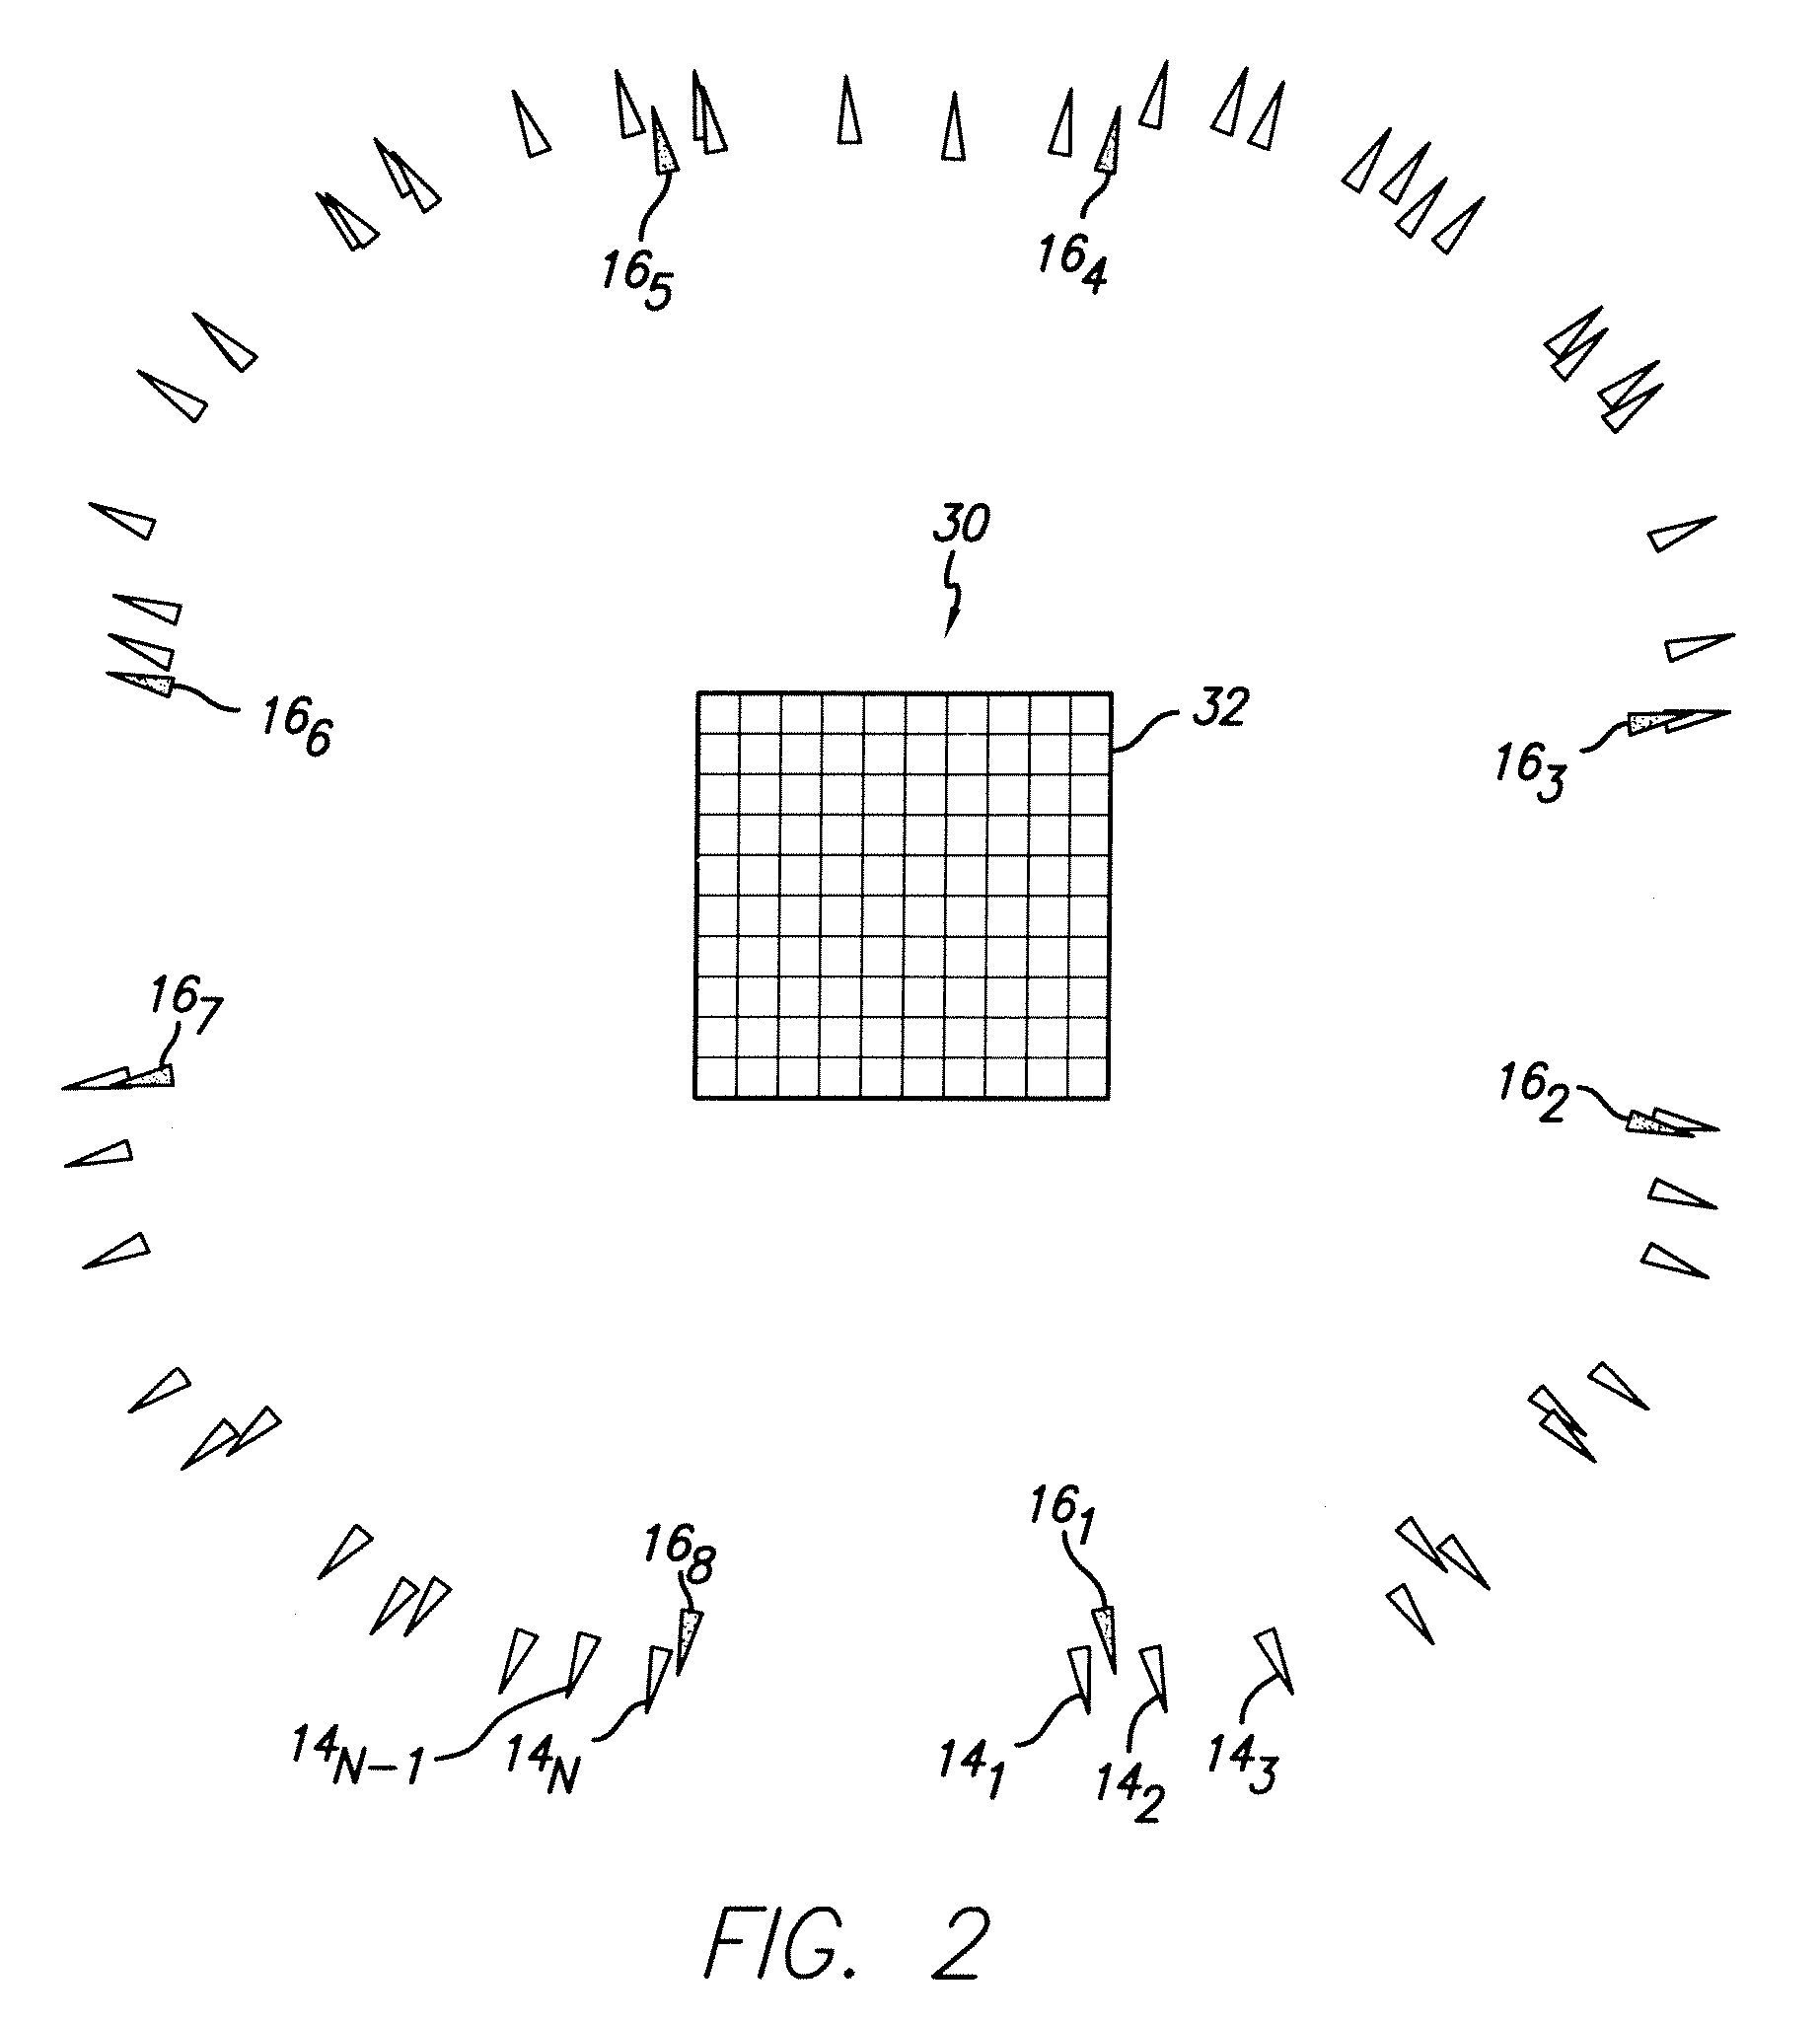 System and method for capturing facial and body motion